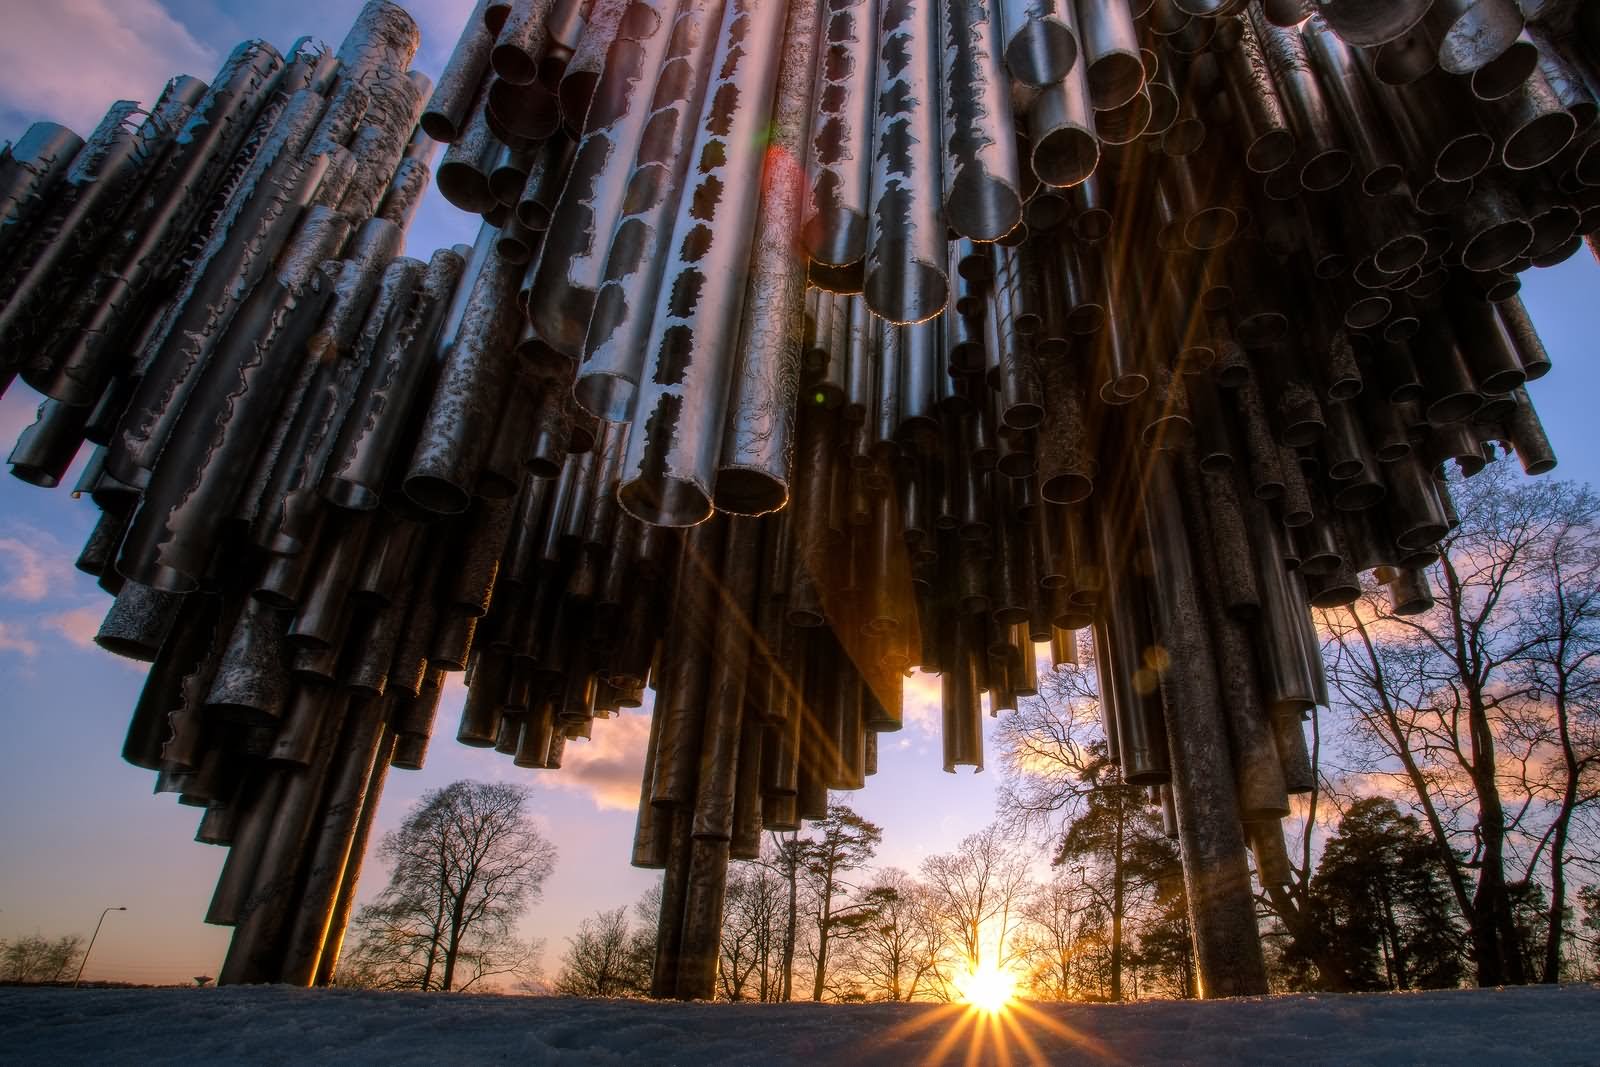 Sunset View Of The Sibelius Monument In Finland